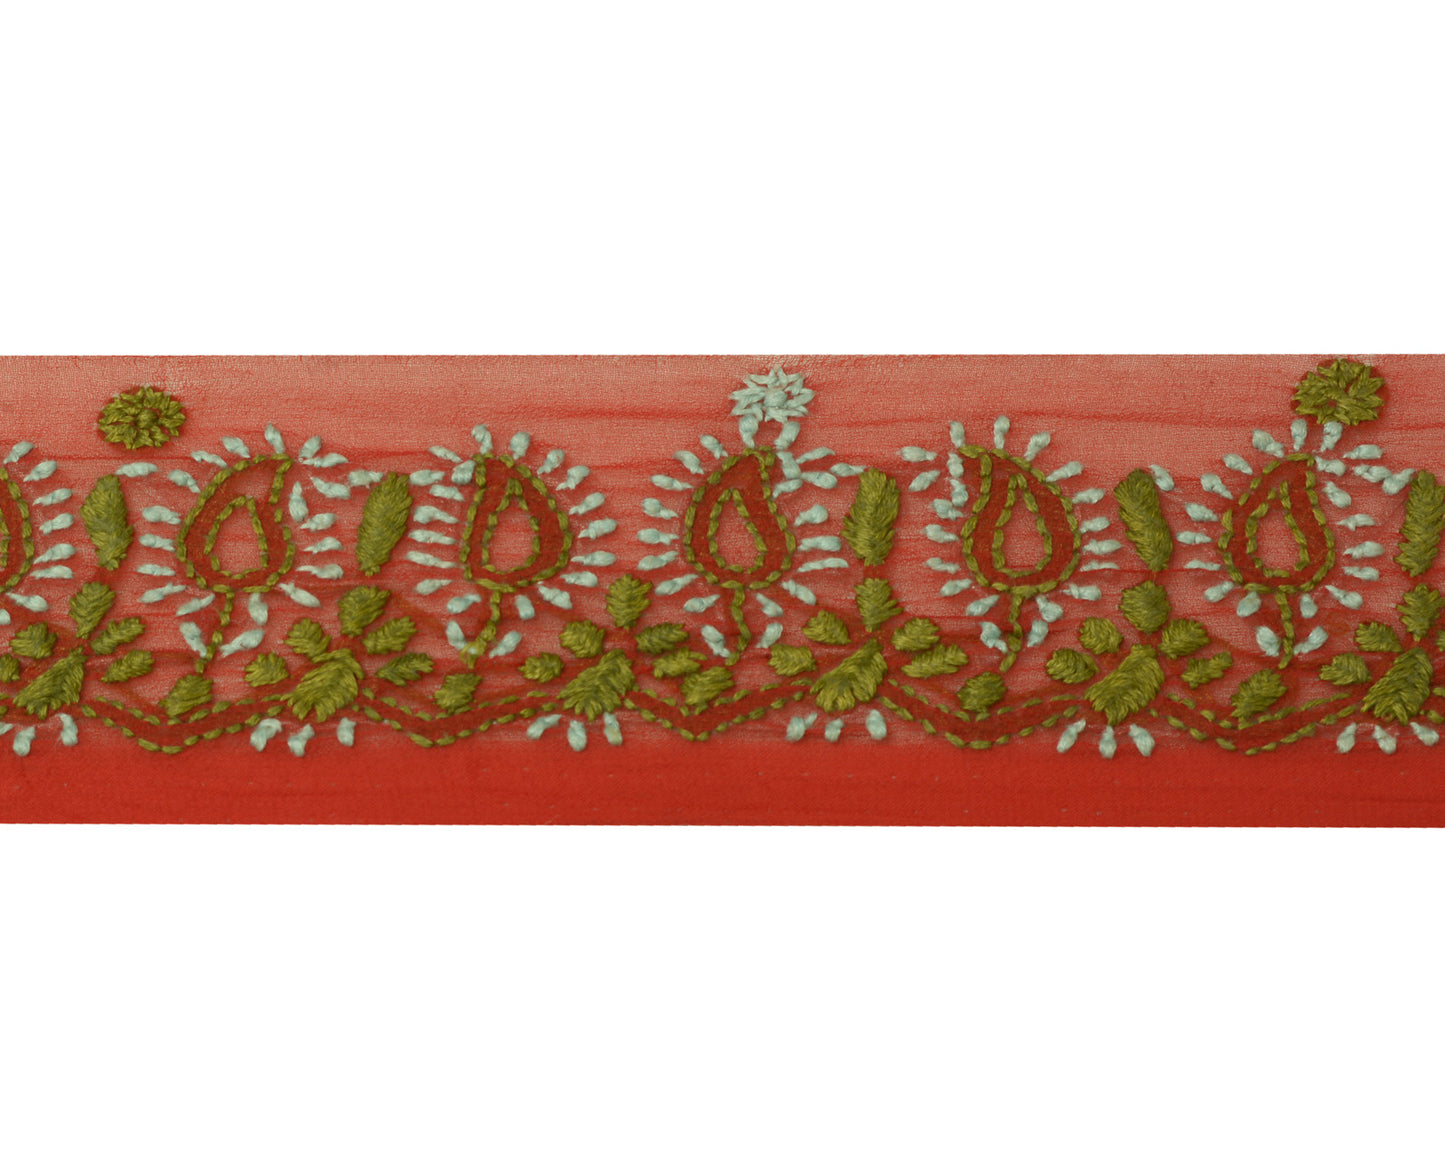 1.75"Sushila Vintage Red Saree Border Indian Craft Sewing Trim Embroidered Lace